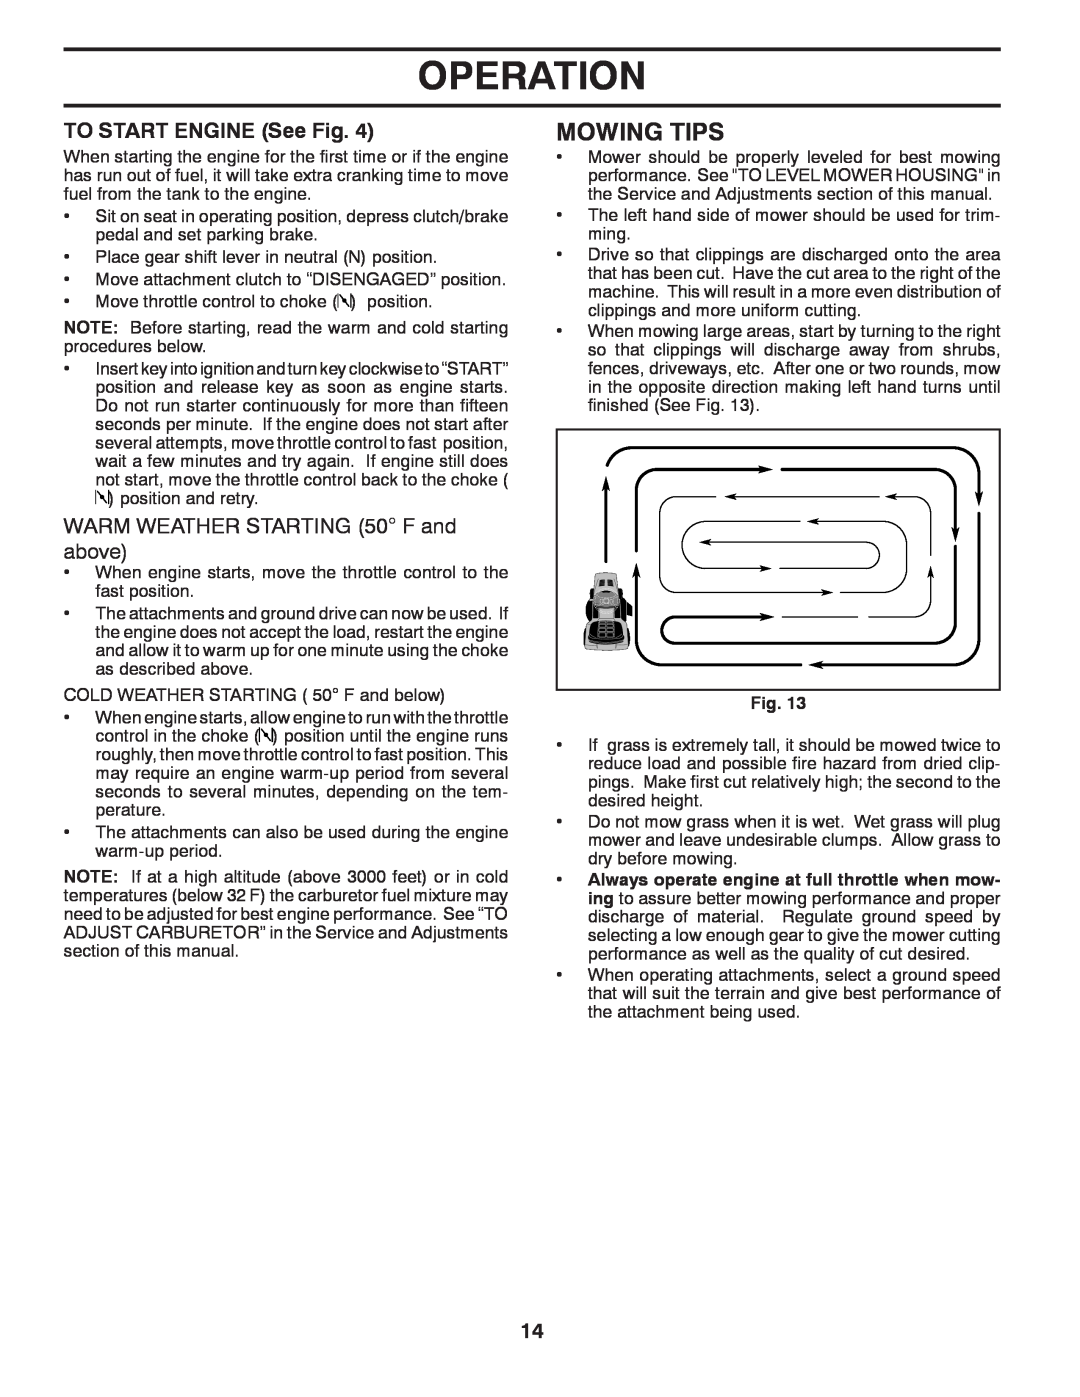 Poulan PP18542 owner manual Mowing Tips, TO START ENGINE See Fig, Operation 